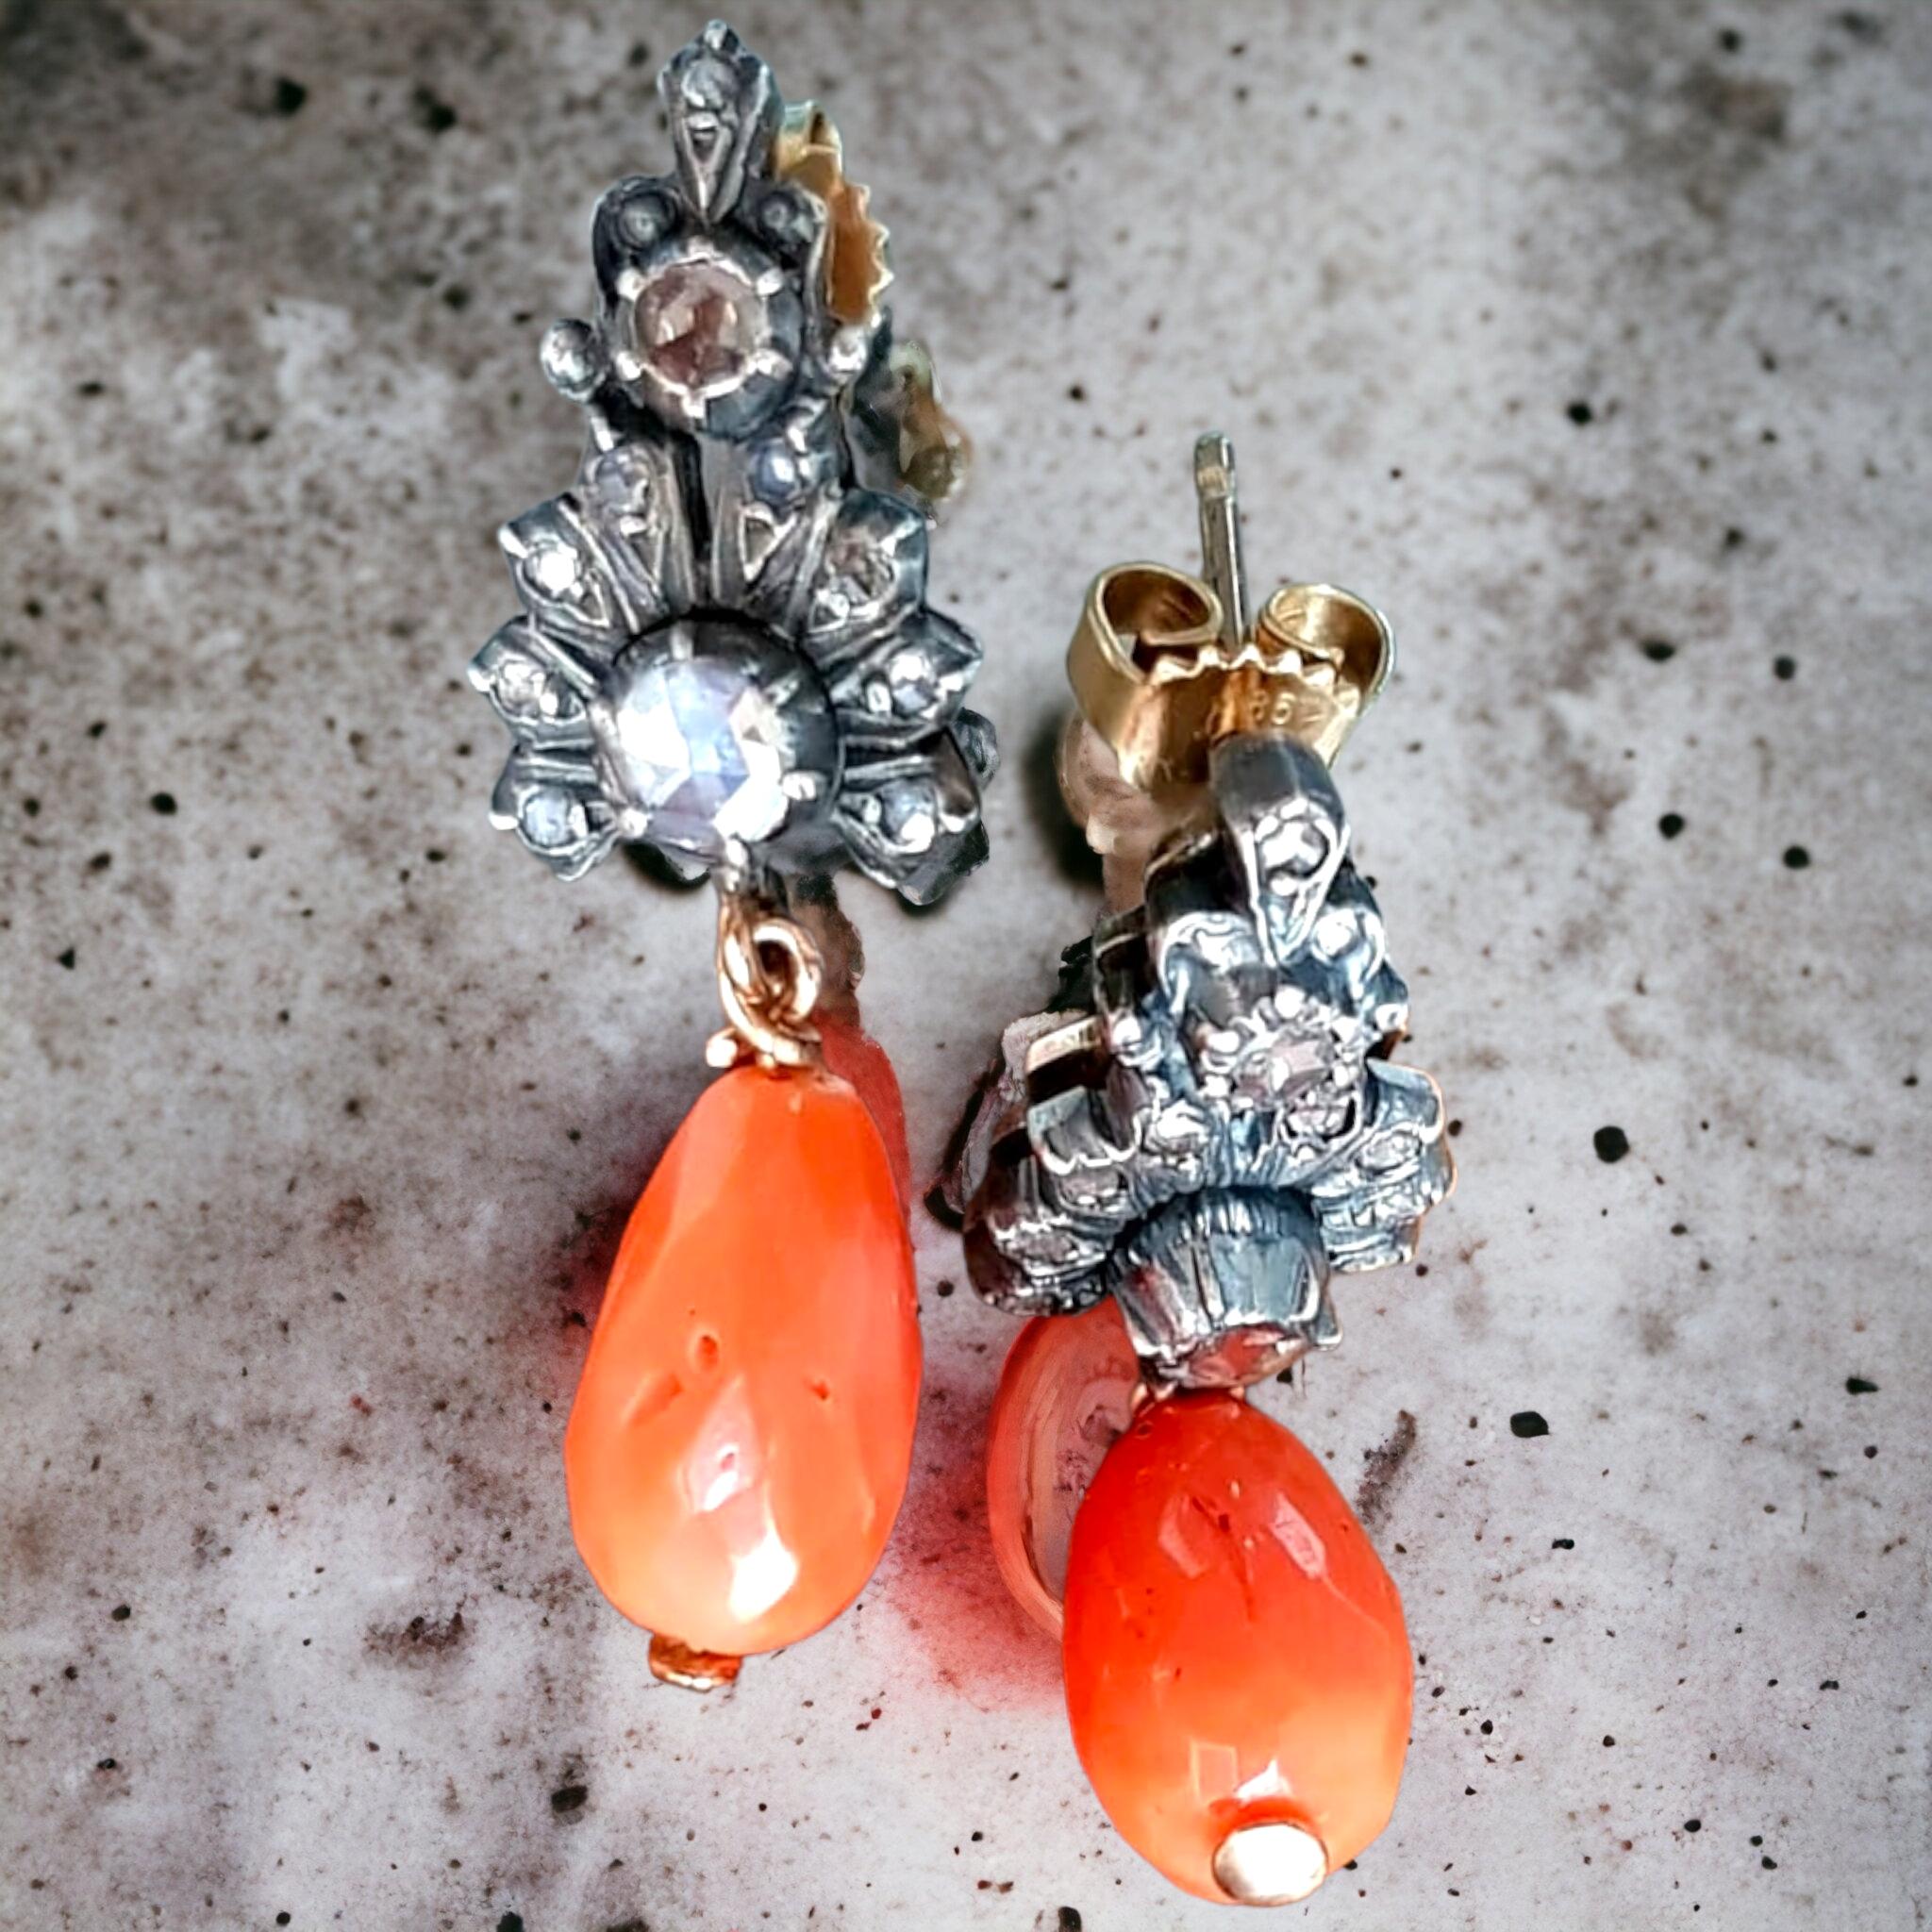 Antique Victorian Mediterranean Salmon Pink Coral and Rose Cut Diamond Ear Pendants.
These bright and cheerful 40mm, 1 1/2 inch long antique earrings feature a matched pair of luscious, deep salmon color coral drops, capped in silver and rose-cut